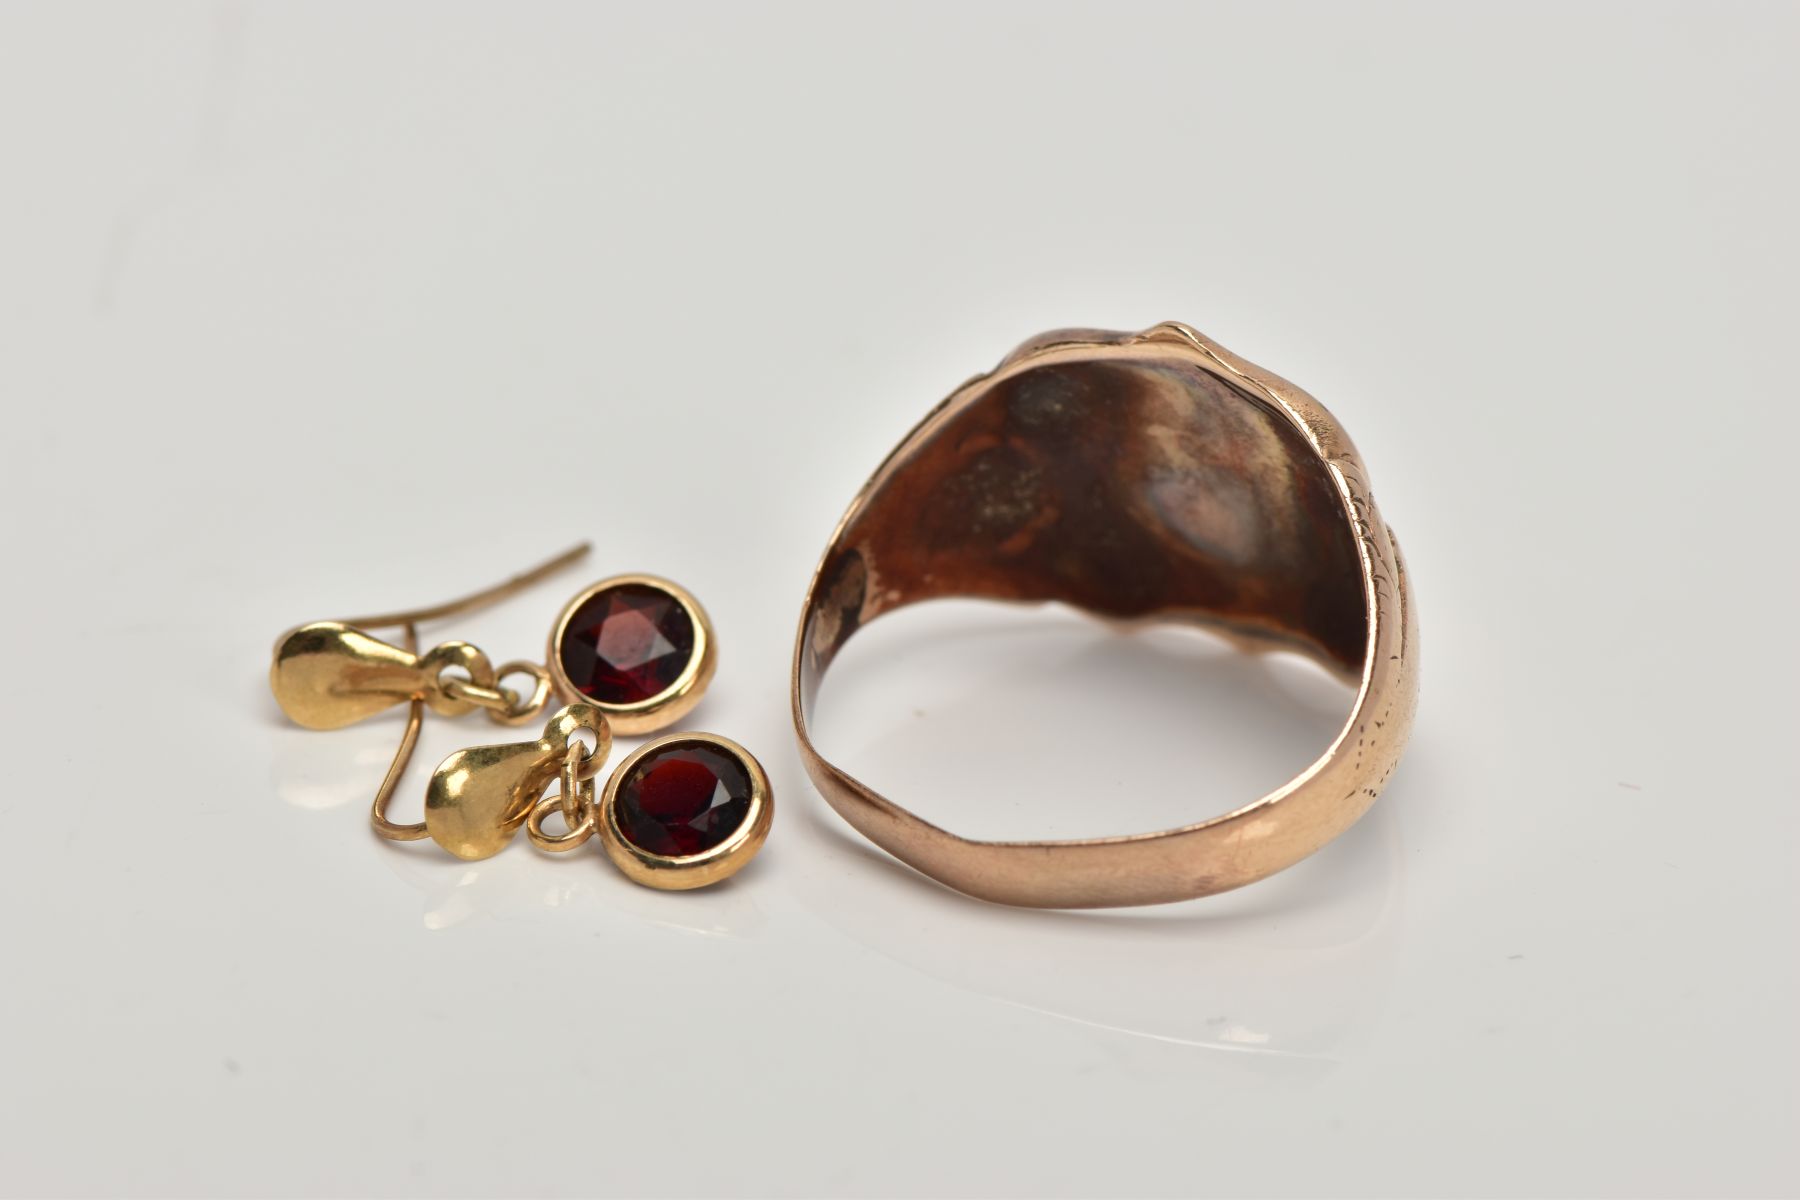 A GENTS 9CT GOLD SIGNET RING AND A PAIR OF YELLOW METAL GARNET DROP EARRINGS, the ring designed with - Image 3 of 3